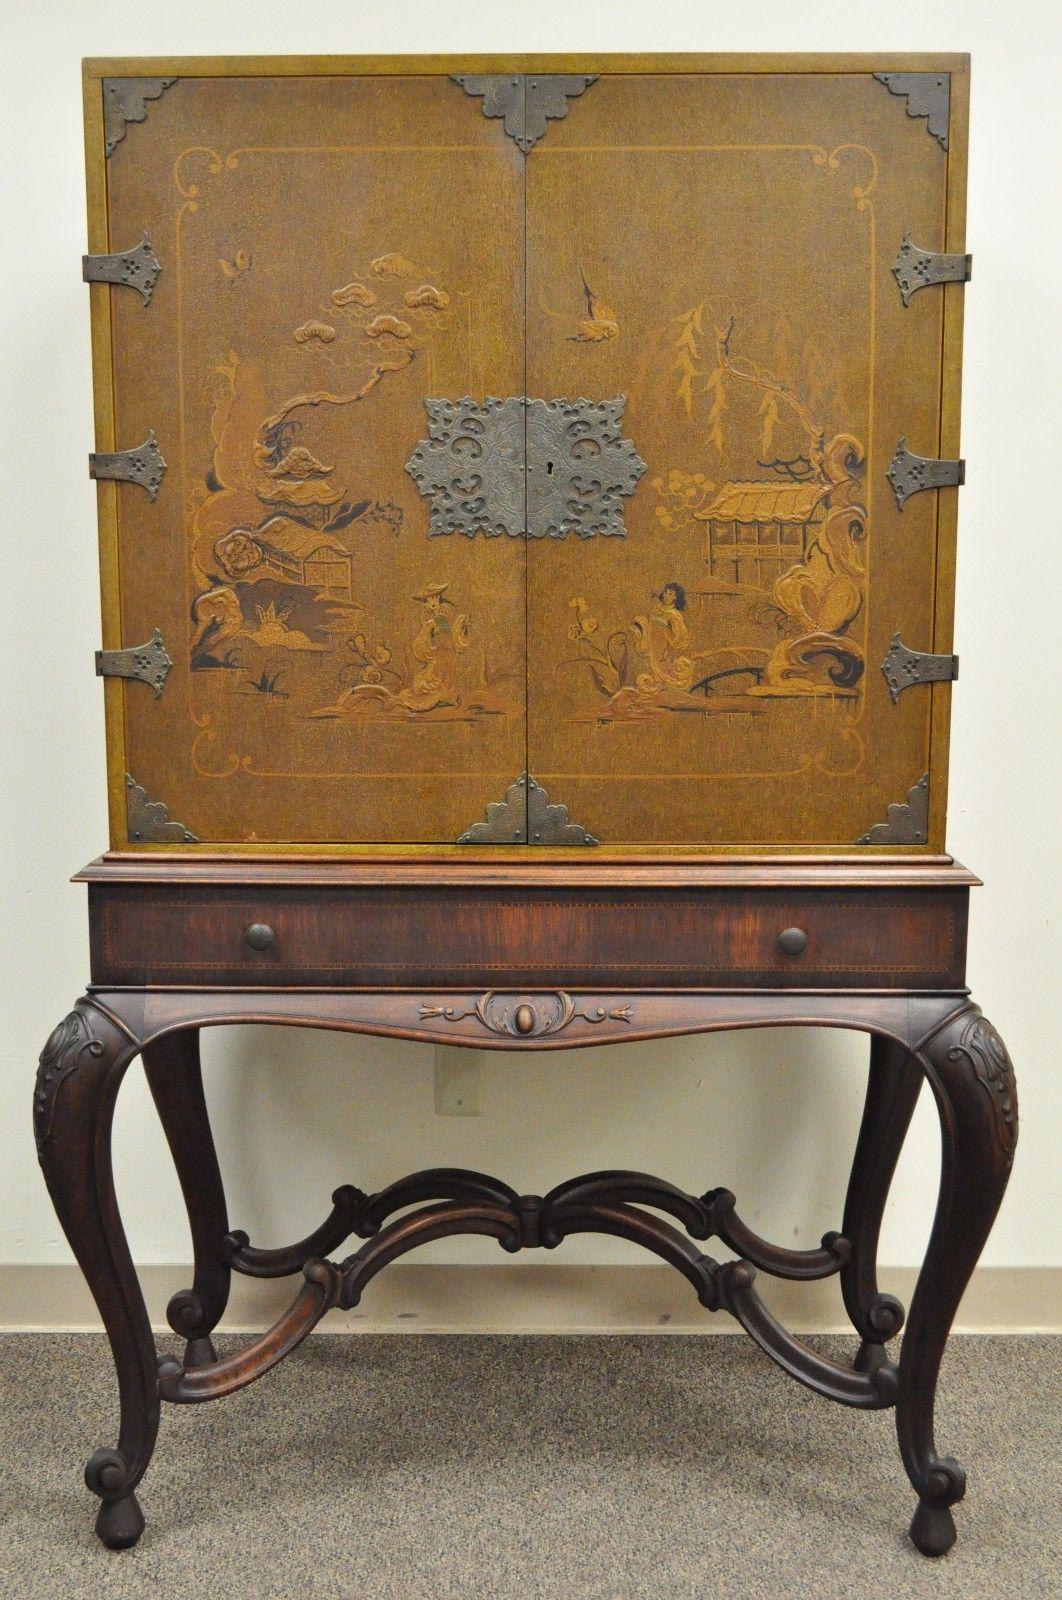 Early 20th century chinoiserie / George III style cabinet. Item features beautiful hand gilt painted cabinet doors and sides depicting Asian scenes, finely etched ornate hardware, carved solid walnut stretcher base and cabriole legs, single dovetail